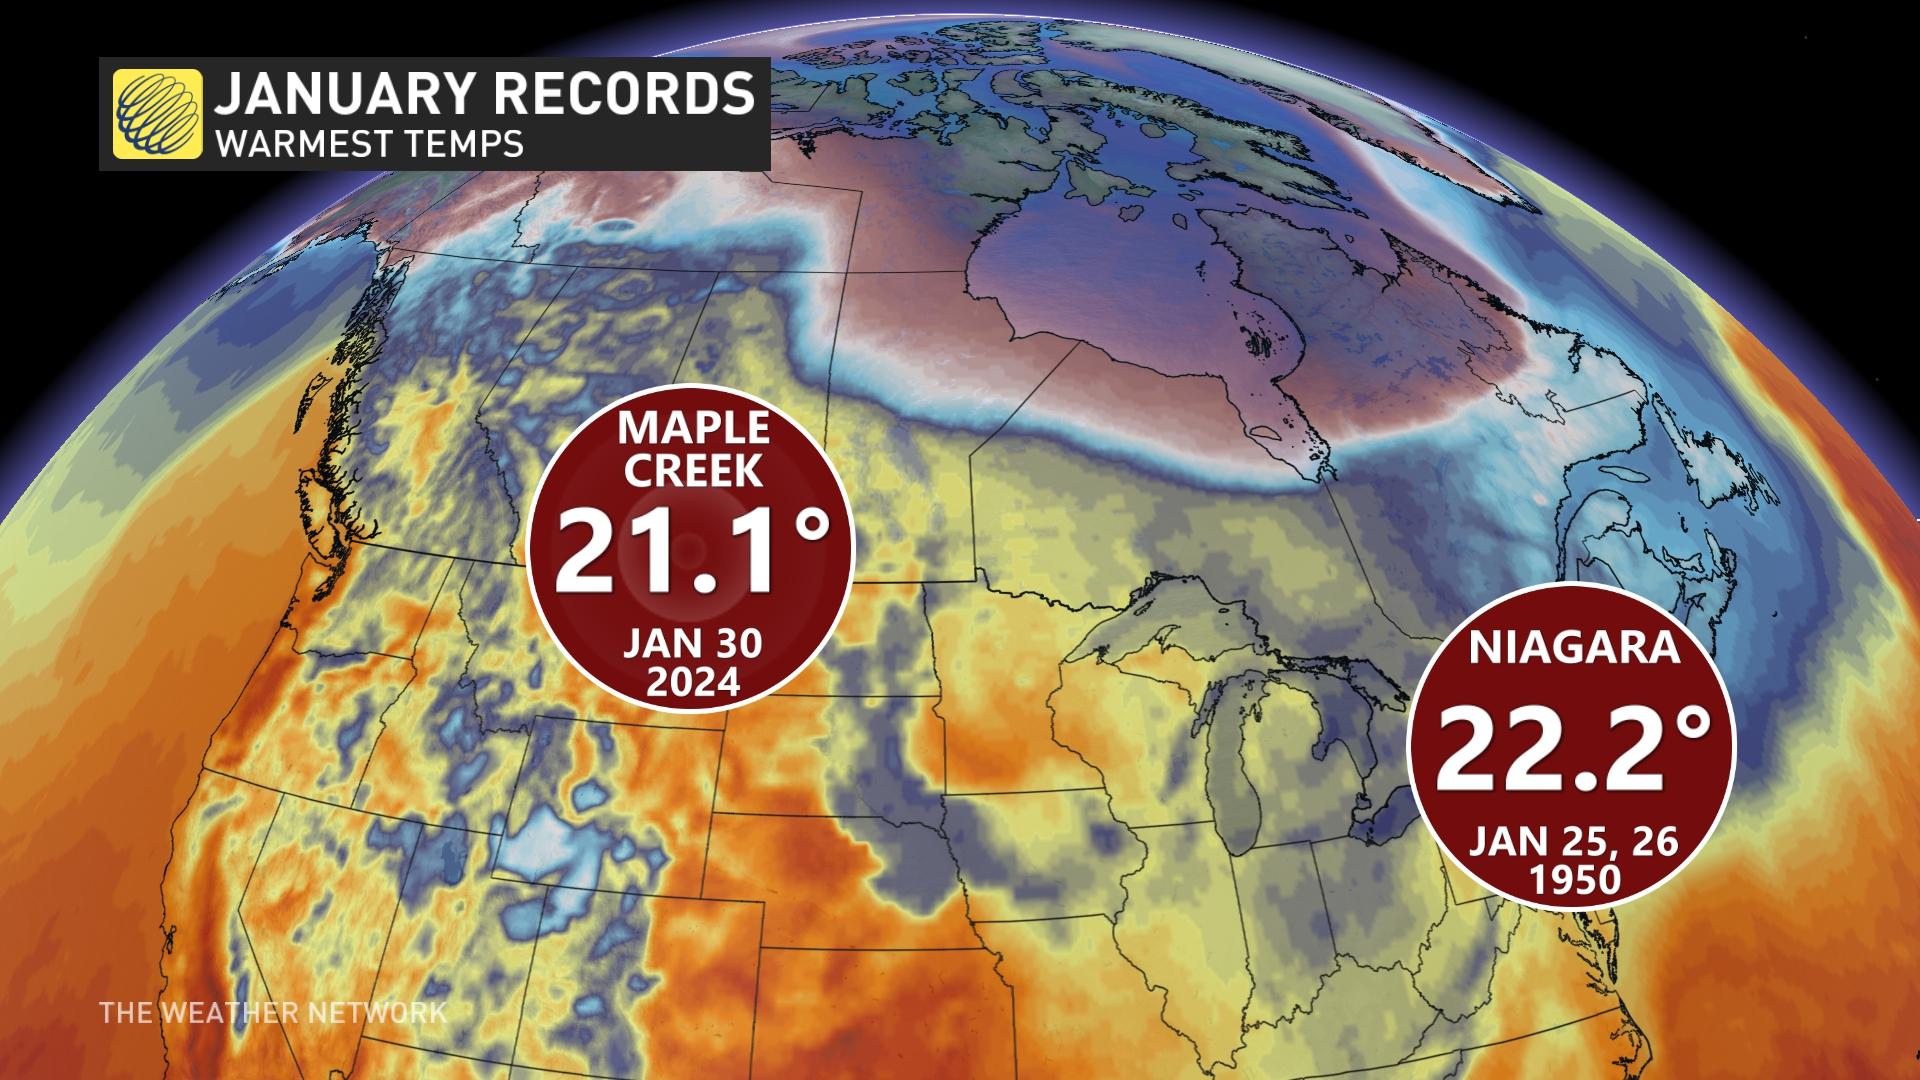 Maple Creek, Saskatchewan, came close to breaking Canada’s previous record January temperature | The Weather Network